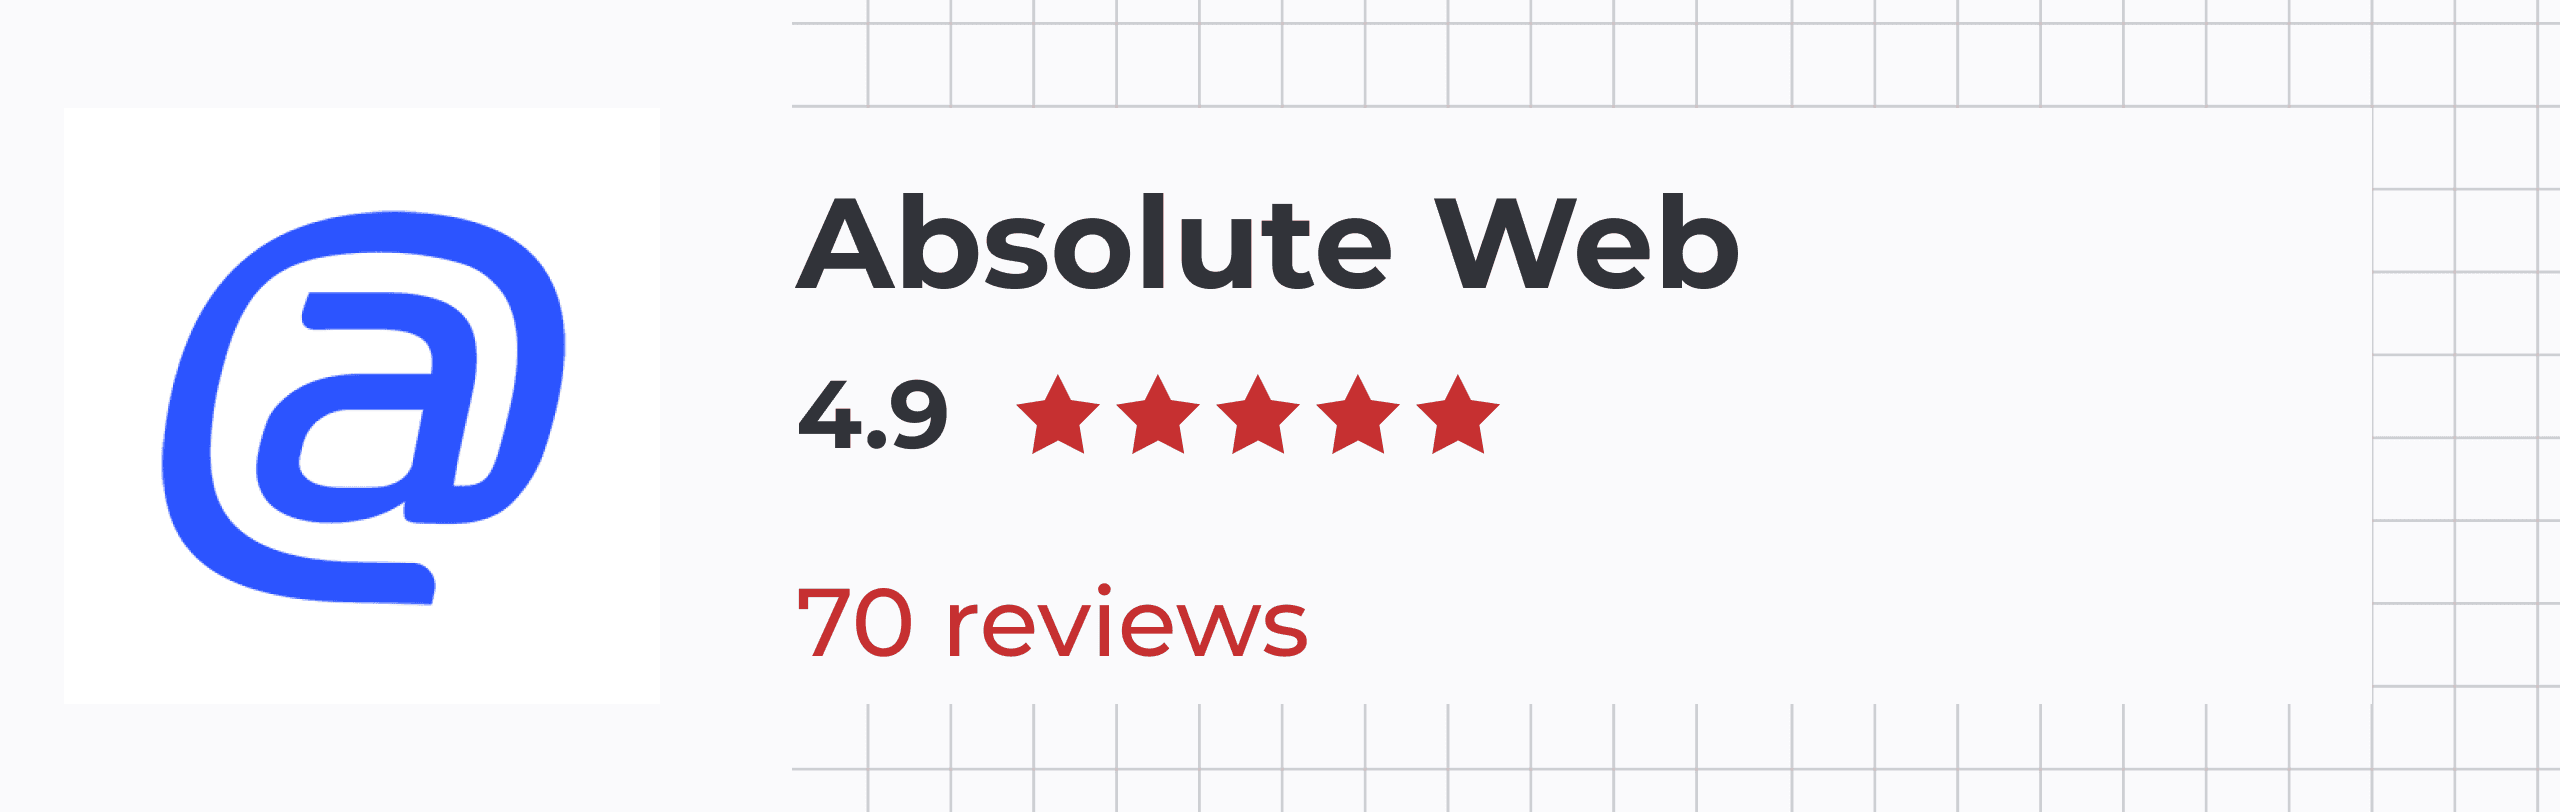 Absolute Web